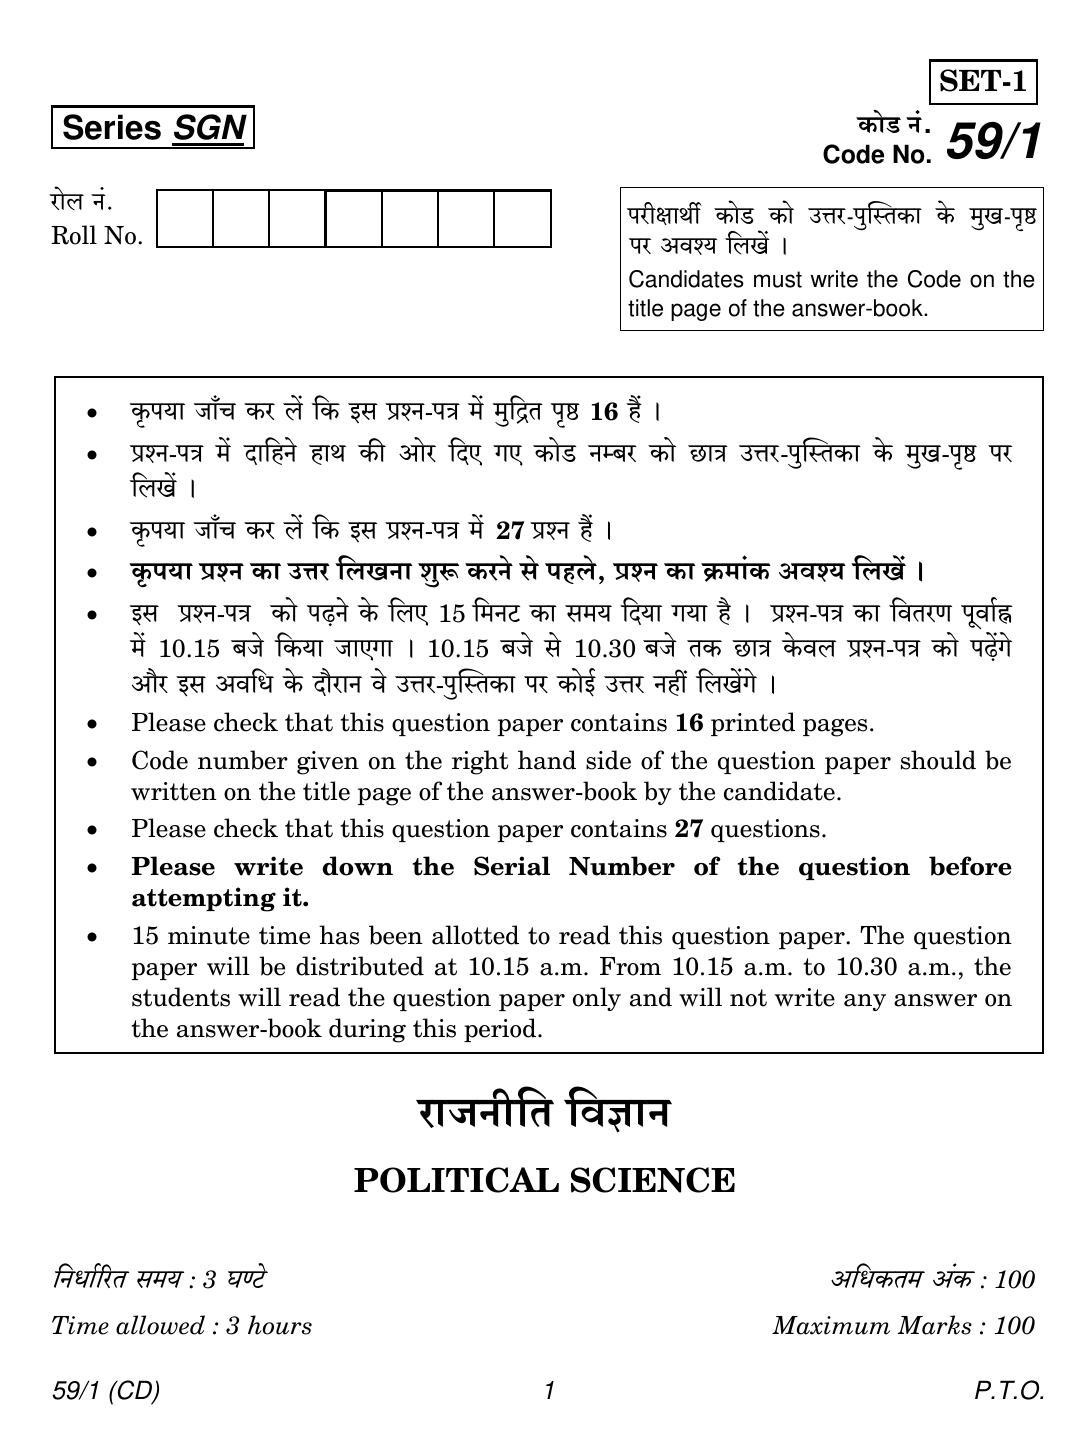 CBSE Class 12 59-1 POLITICAL SCIENCE CD 2018 Question Paper - Page 1